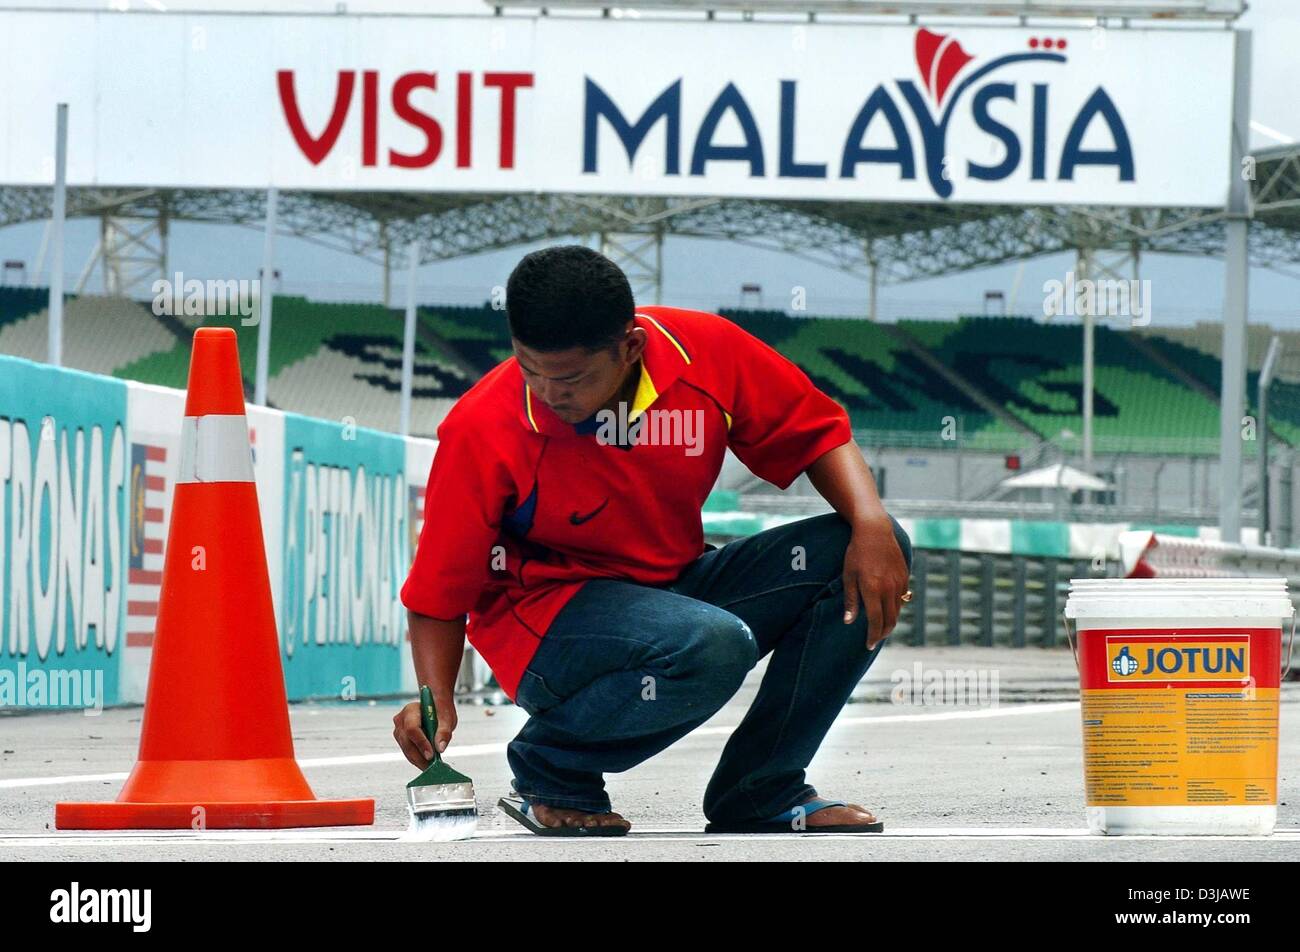 (dpa) A Malaysian navvy paints the last racetrack markers on the Sepang racetrack near Kuala Lumpur on Wednesday, 17 March 2004. On Sunday, 21 March 2004, the Grand Prix of Malaysia will underway. Stock Photo